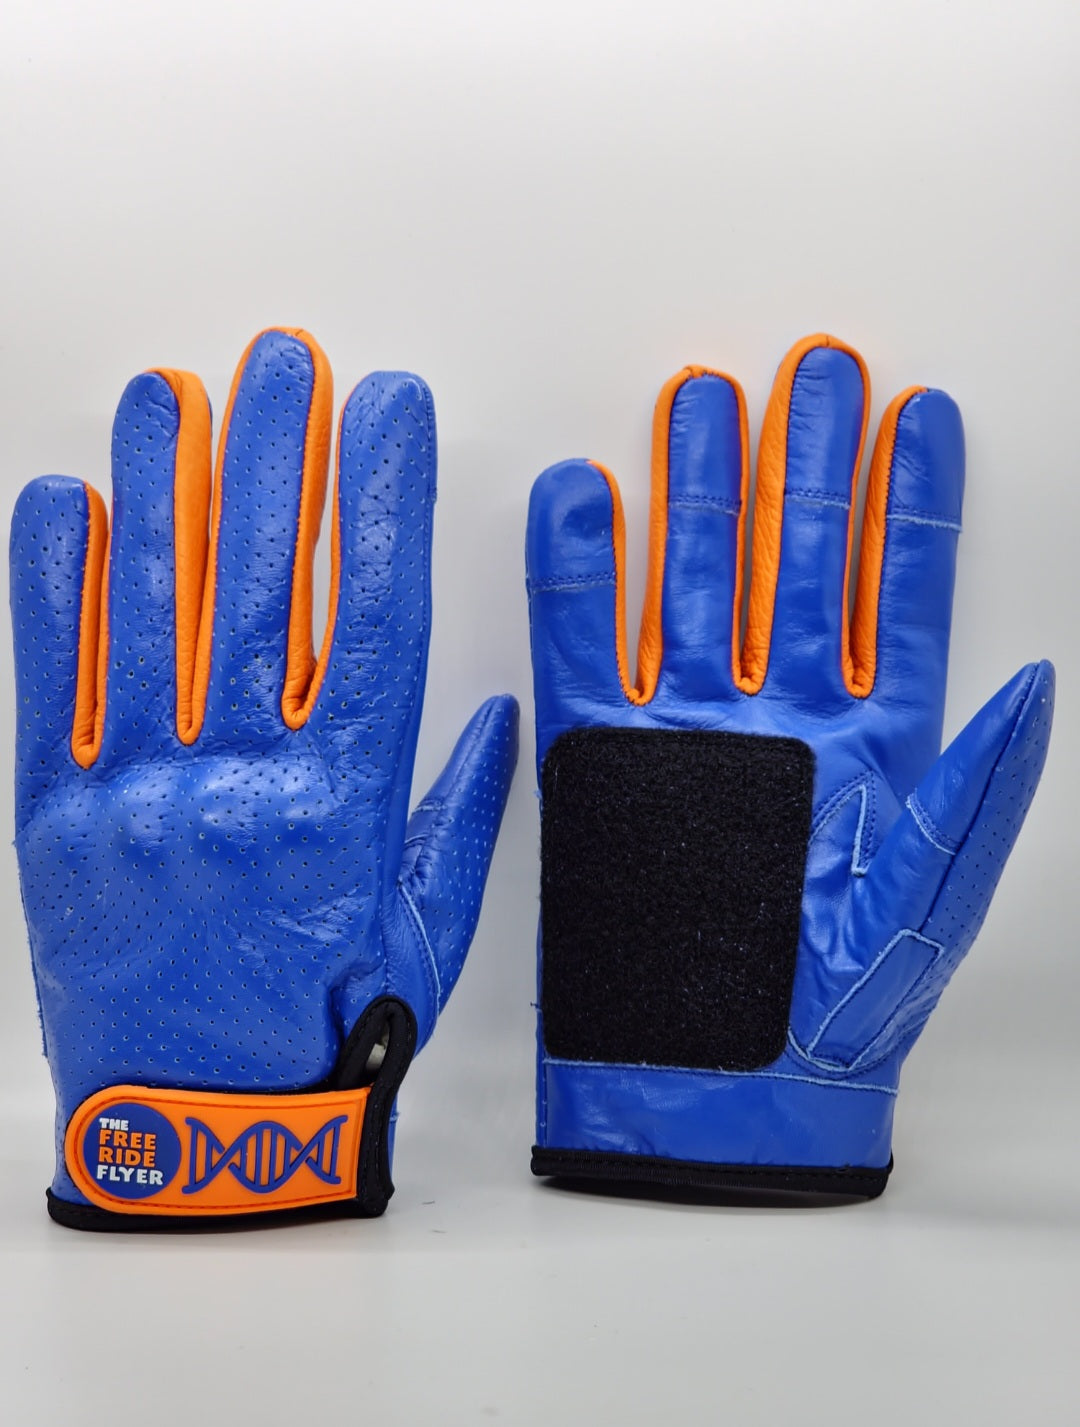 The Free Ride Flyer Gloves & Helix